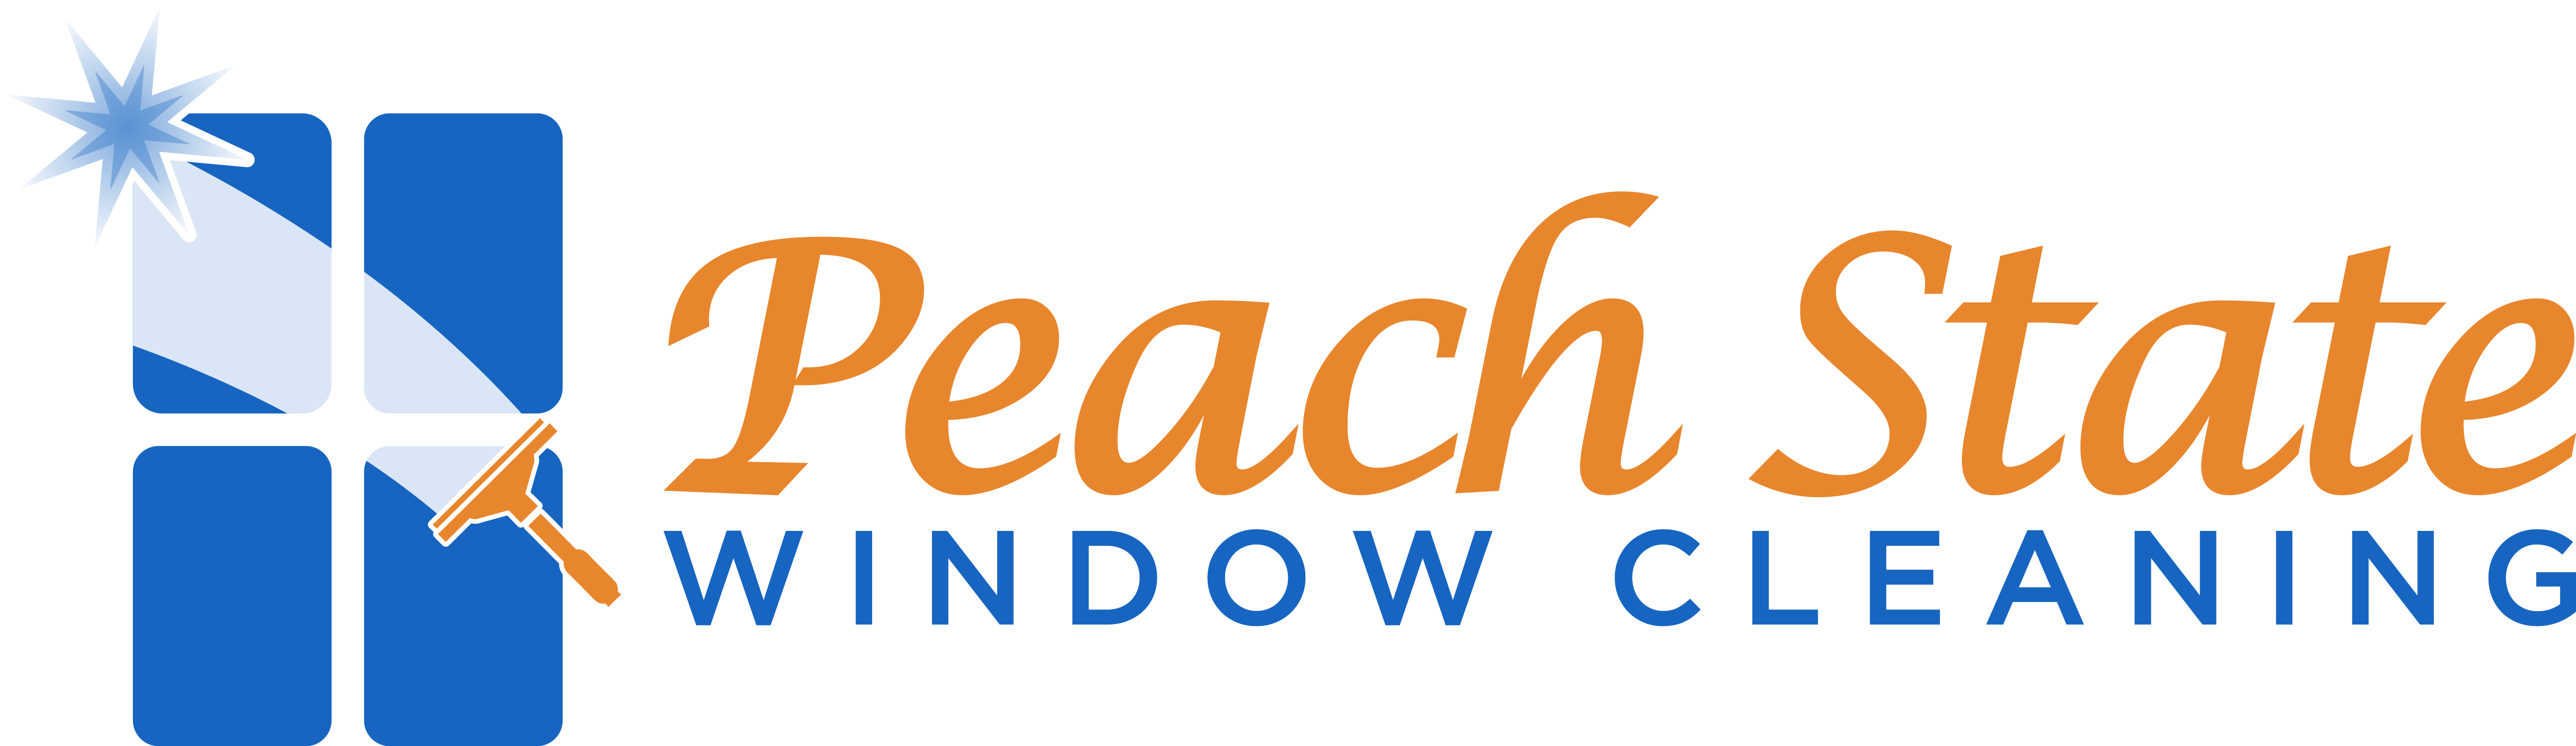 Peach State Window Cleaning